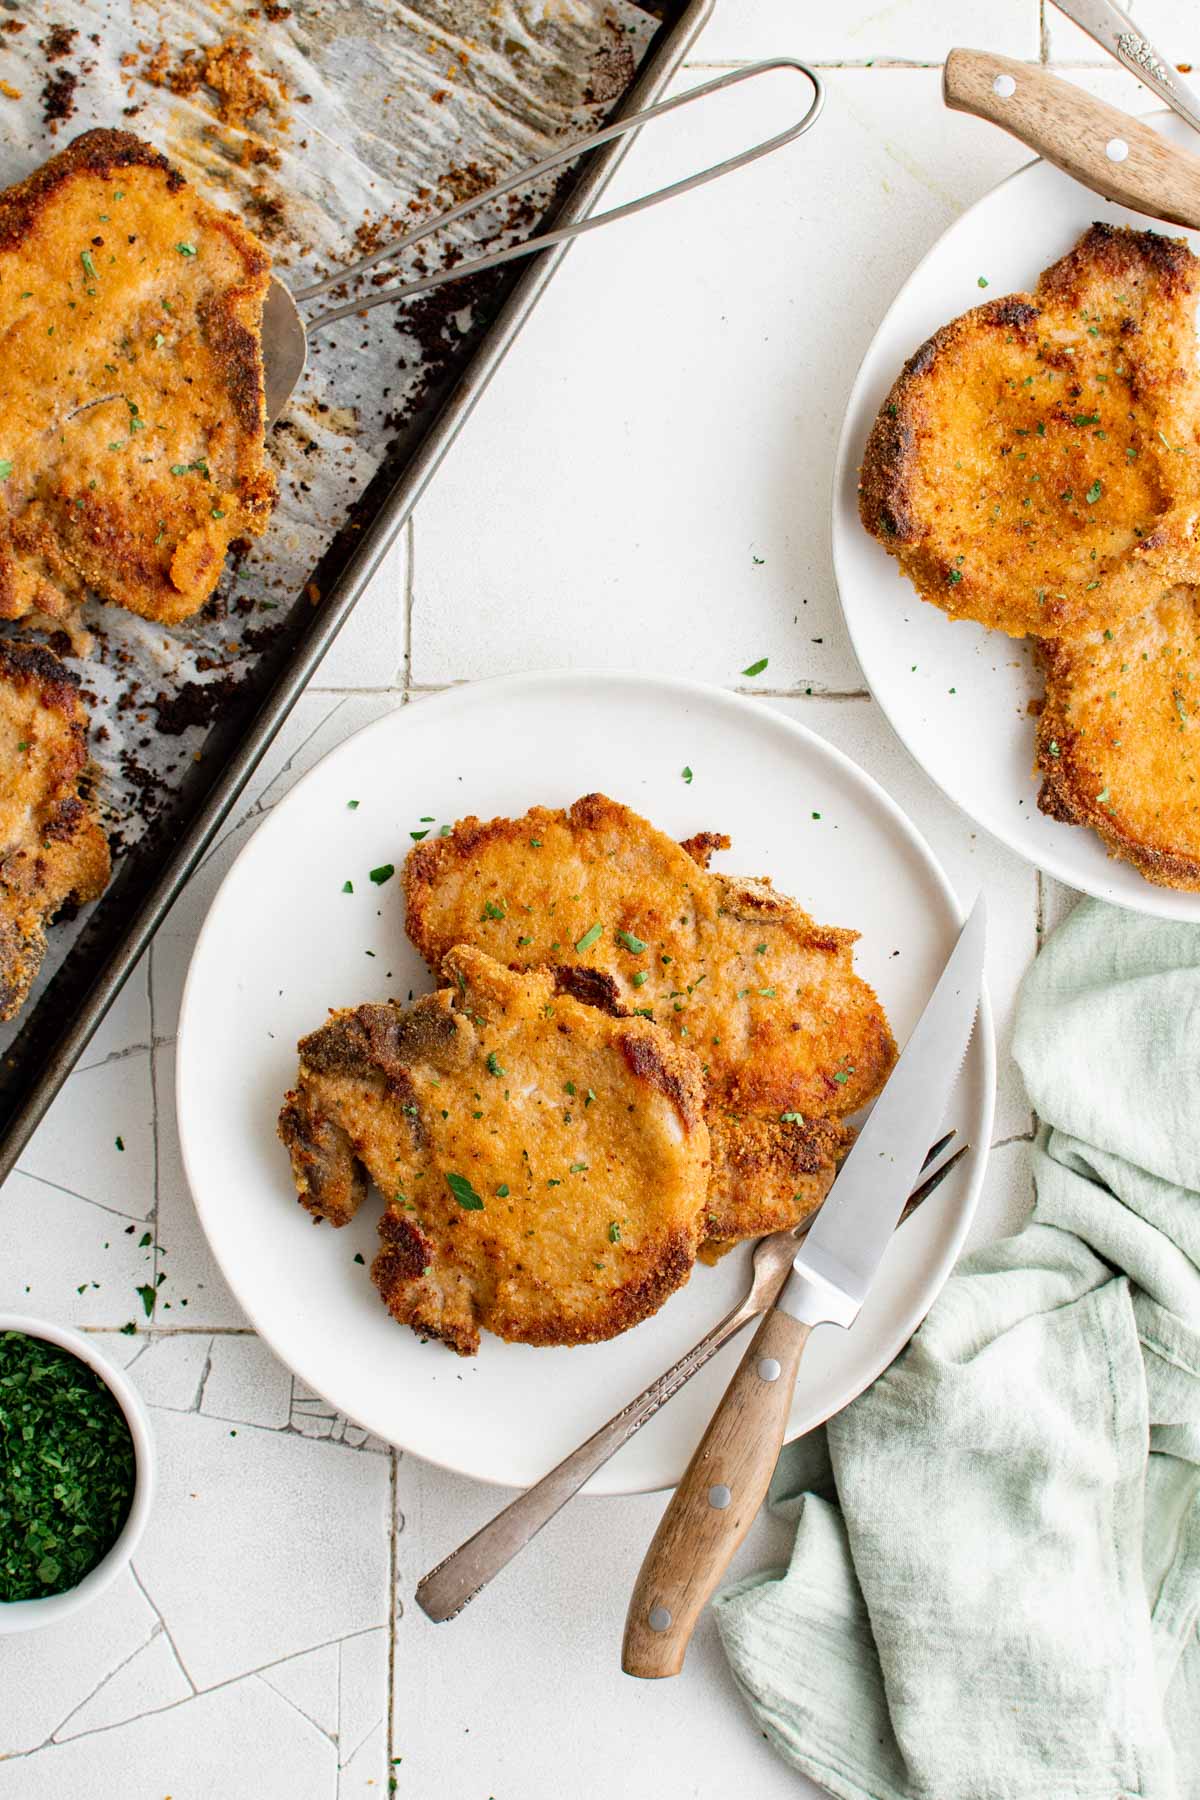 Breaded Baked pork chops on plates with silverware.